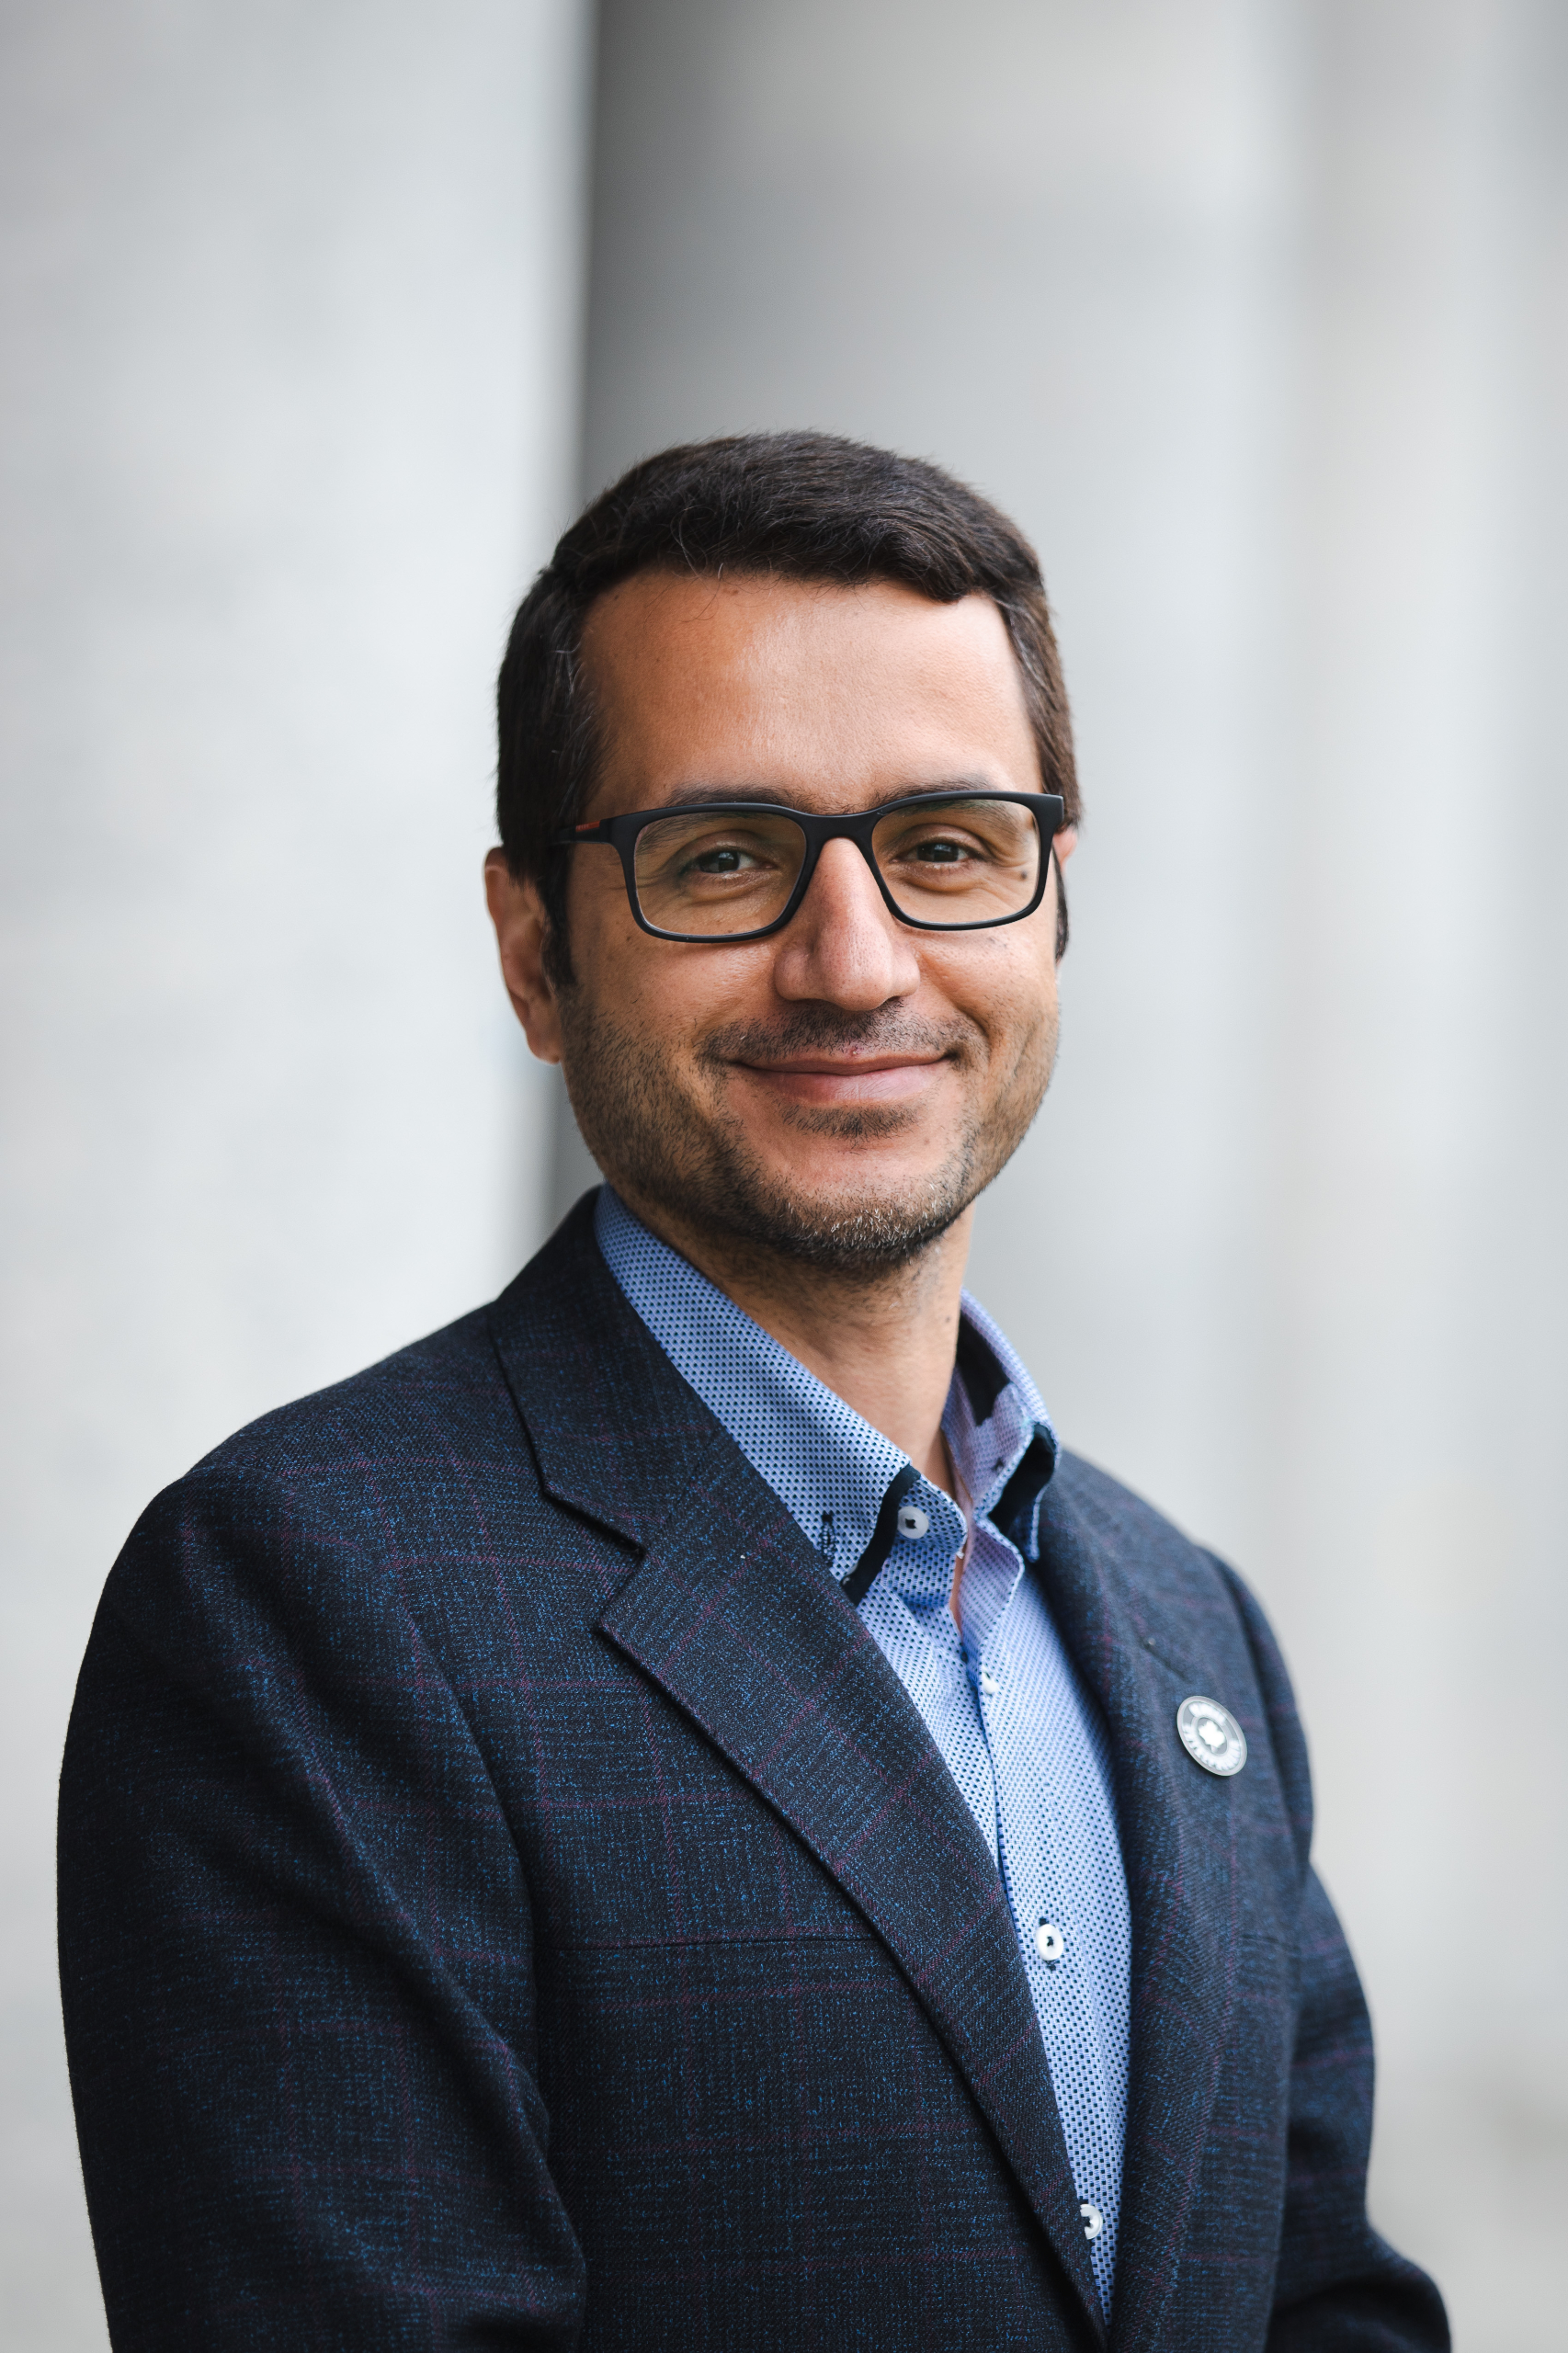 Dr. Mohammadreza Rezaee, PhD, currently serves as the national team lead for quantum technologies at Mitacs. He earned his Doctorate in Physics from the University of Tennessee, Knoxville, in 2015 and subsequently held postdoctoral positions at Texas A&M University and the University of Ottawa.  During his time at the University of Ottawa, Dr. Rezaee played a pivotal role in the establishment of the Joint Centre for Extreme Photonics (JCEP) lab, a collaborative quantum-focused initiative in partnership with the NRC. His academic pursuits have revolved around pioneering research areas such as quantum light sources, the application of vacancy centers in diamond for quantum sensing, and quantum simulation.  Beyond his academic endeavors, Dr. Rezaee is a visionary entrepreneur, having founded three quantum hardware startups in both Canada and the USA. He is an alum of the Creative Destruction Lab-QML program at the Rotman School of Business, University of Toronto (2018), and was selected for participation in the Y Combinator's W19 cohort in California, USA.  Driven by an unwavering passion for advancing quantum technologies, Dr. Rezaee continues to be at the forefront of bridging the gap between cutting-edge scientific innovation and transformative commercial ventures in his current role as Mitacs' Senior Advisor and Quantum Lead.